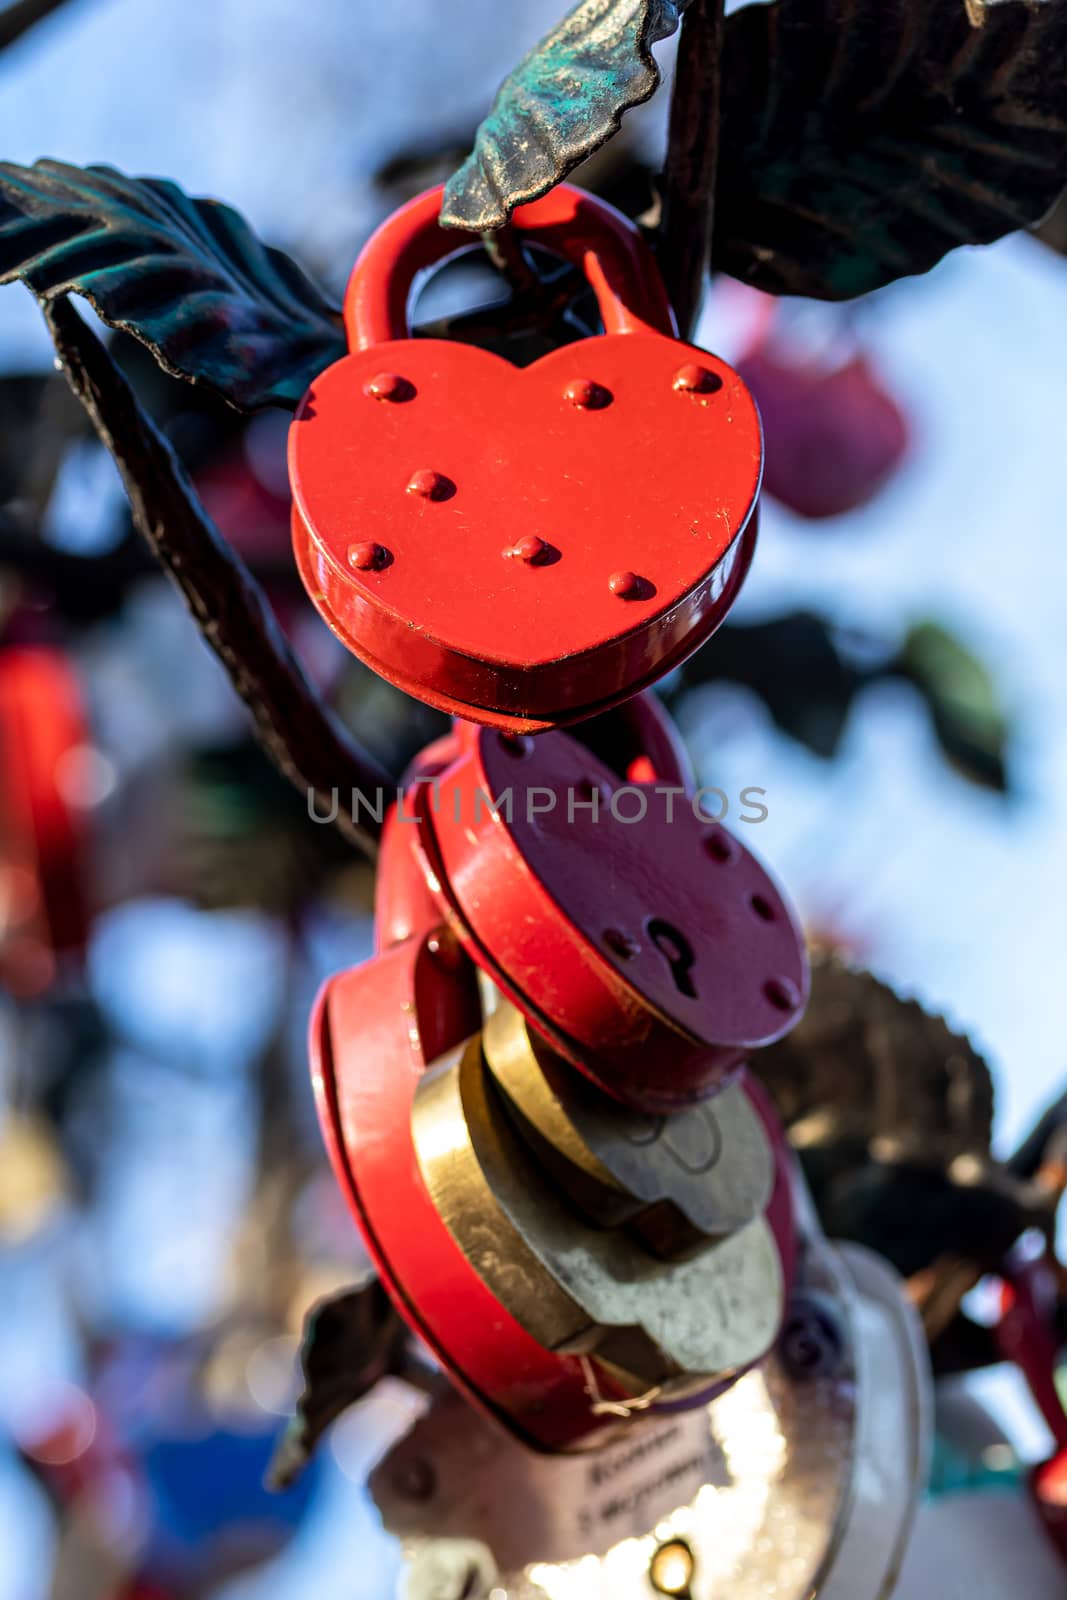 Many wedding colorful locks on a wedding tree. Symbol of love, marriage and happiness.